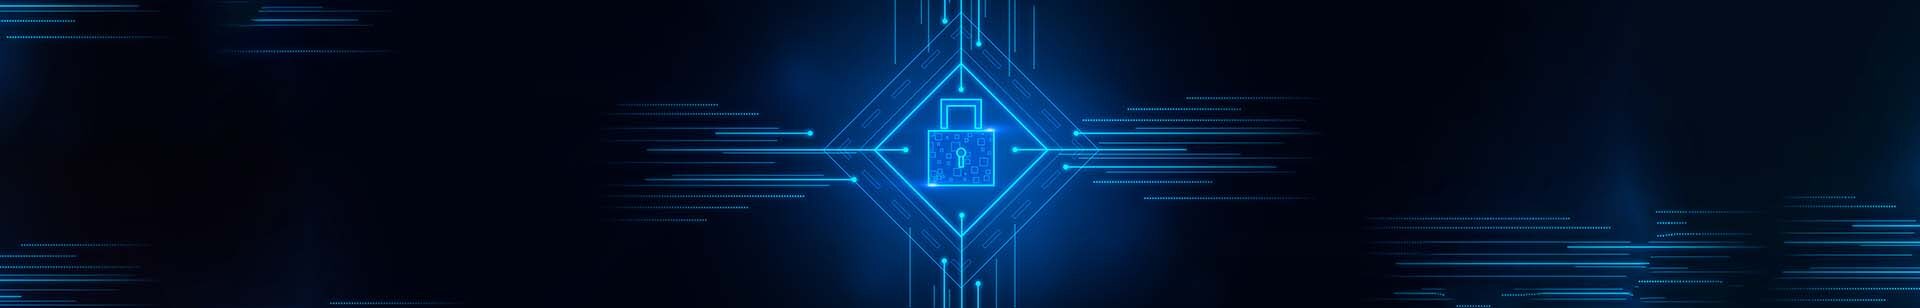 Glowing lock interface on blue background. Digital security and protection concept. 3D Rendering